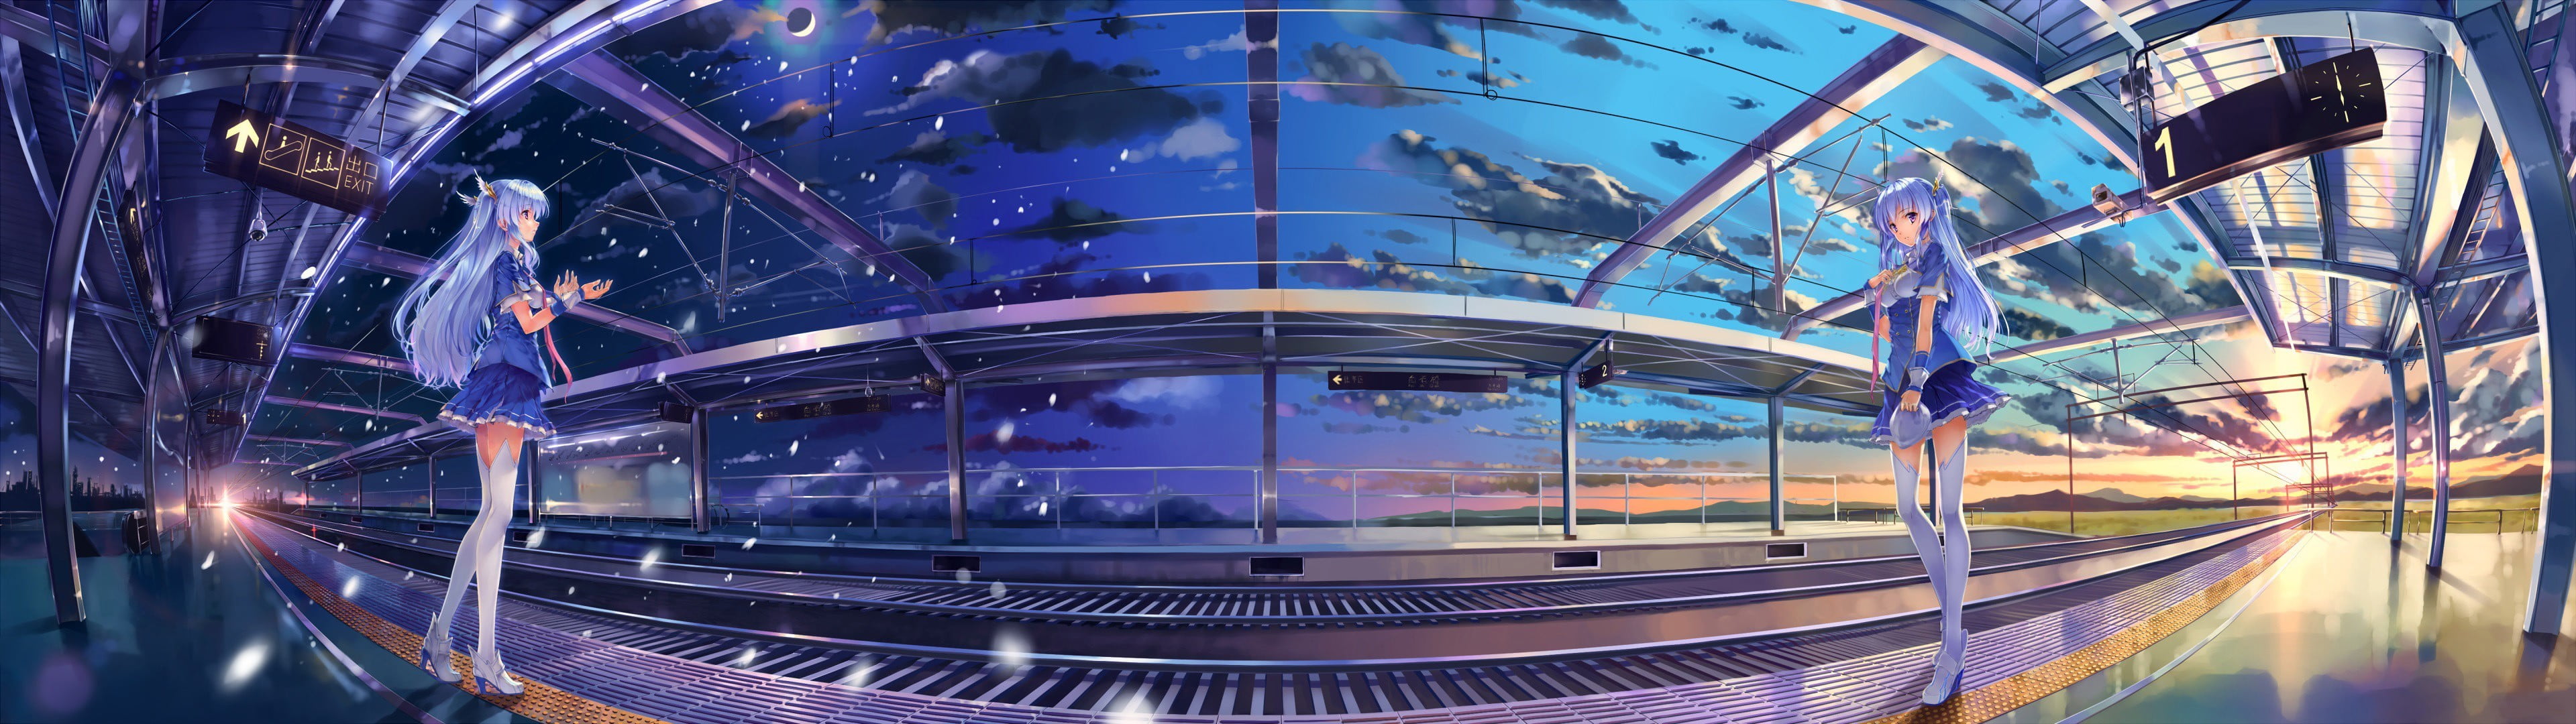 blue haired female anime character, sky, clouds, railway, multiple display